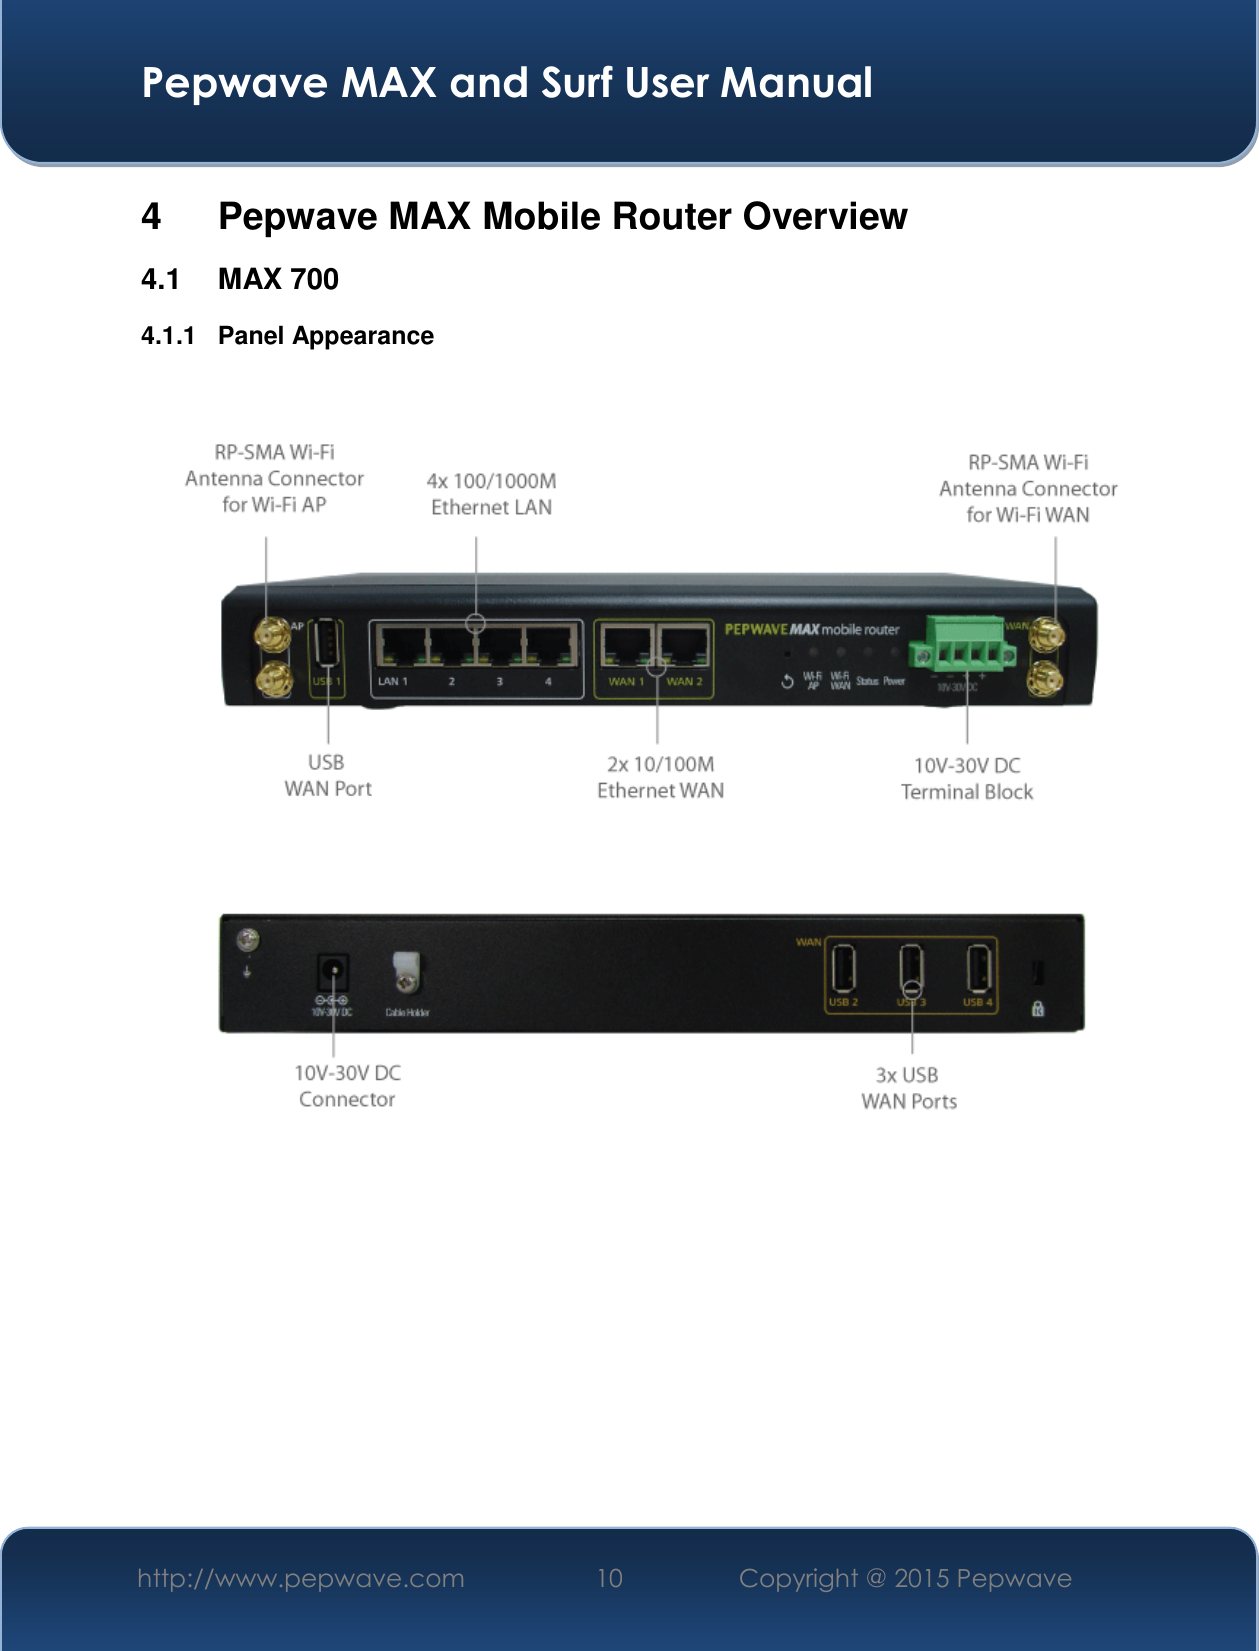  Pepwave MAX and Surf User Manual http://www.pepwave.com 10   Copyright @ 2015 Pepwave   4  Pepwave MAX Mobile Router Overview 4.1  MAX 700 4.1.1  Panel Appearance       